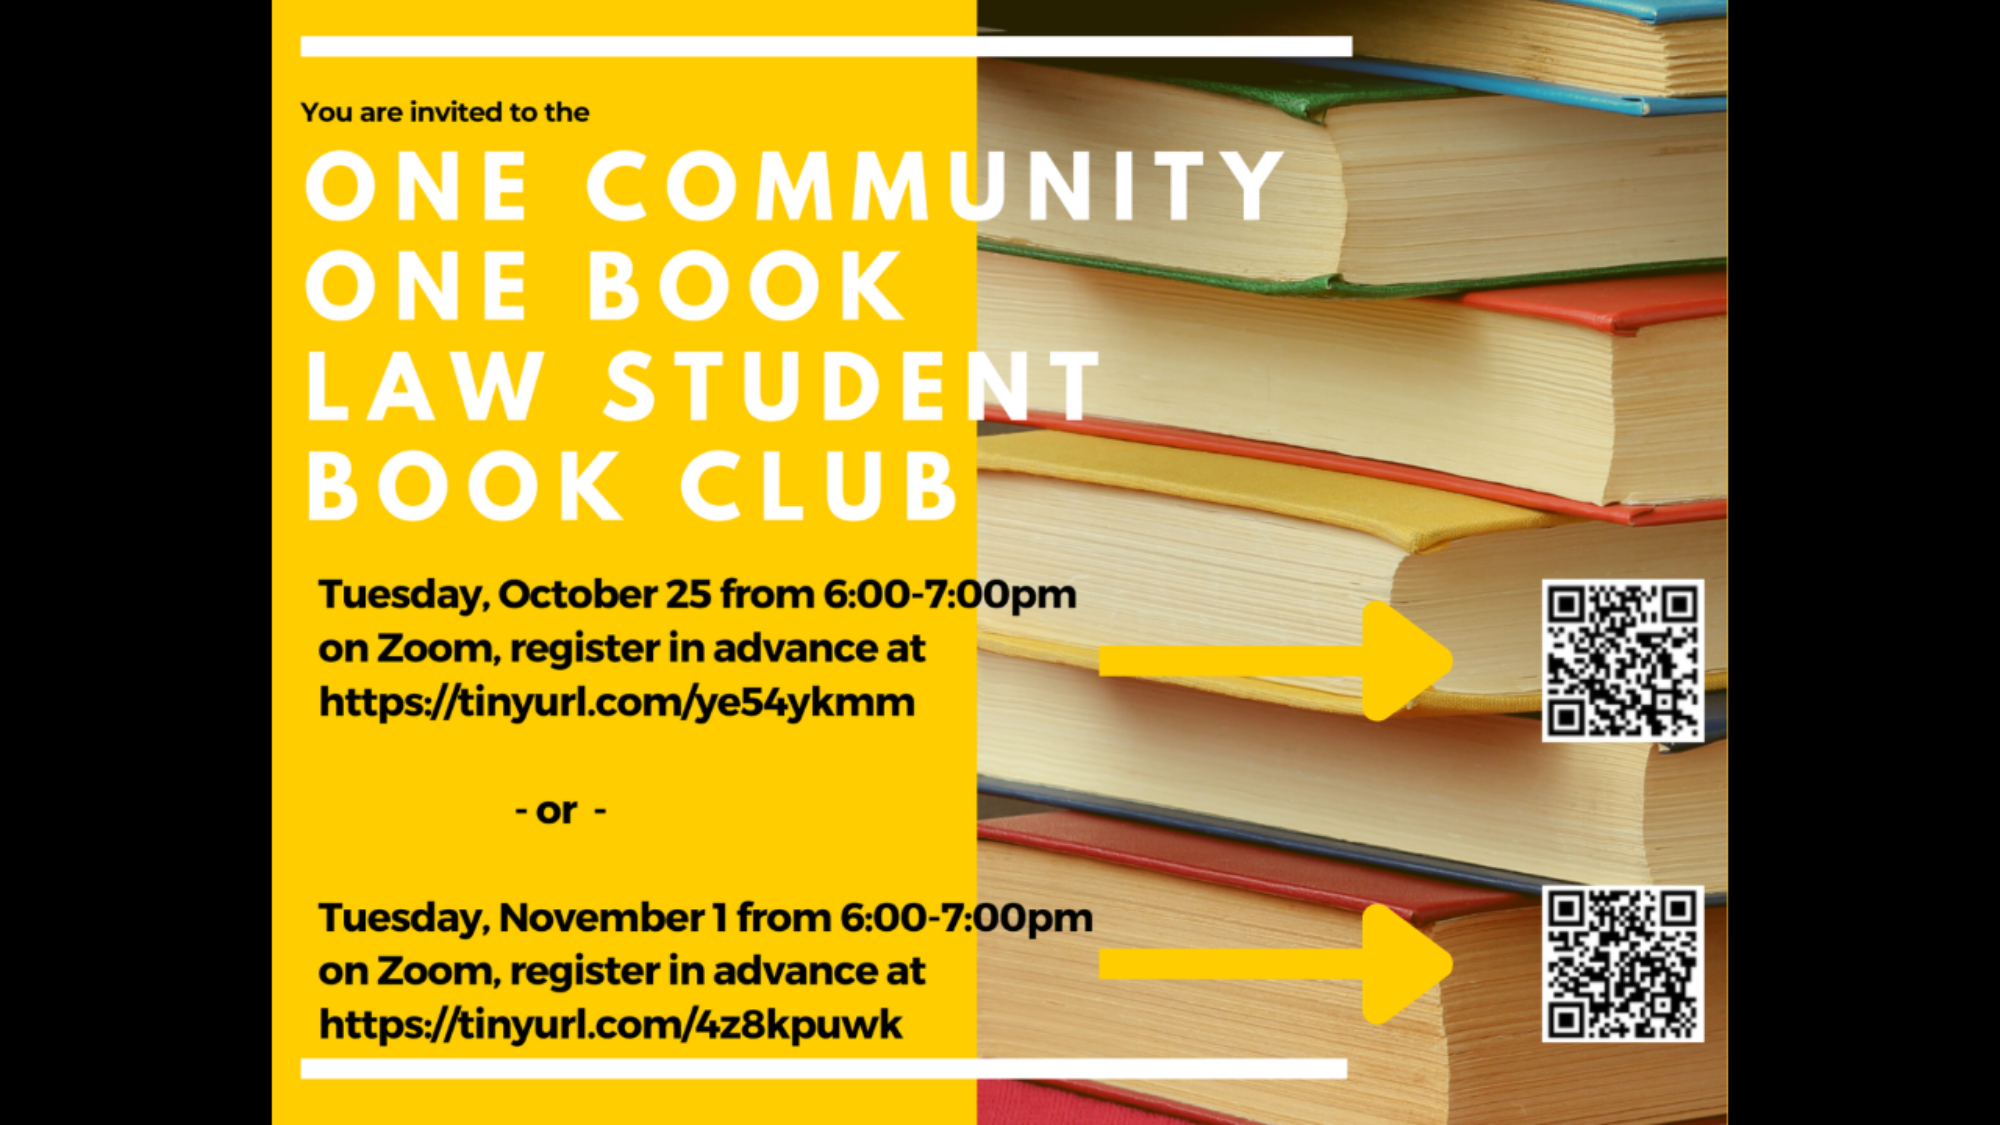 You are invited to the One community one book law student book club. Tuesday, October 25 from 6:00-7:00pm on zoom, register in advance or tuesday november 1 from 6:00-7:00 pm on zoom, register in advance at 